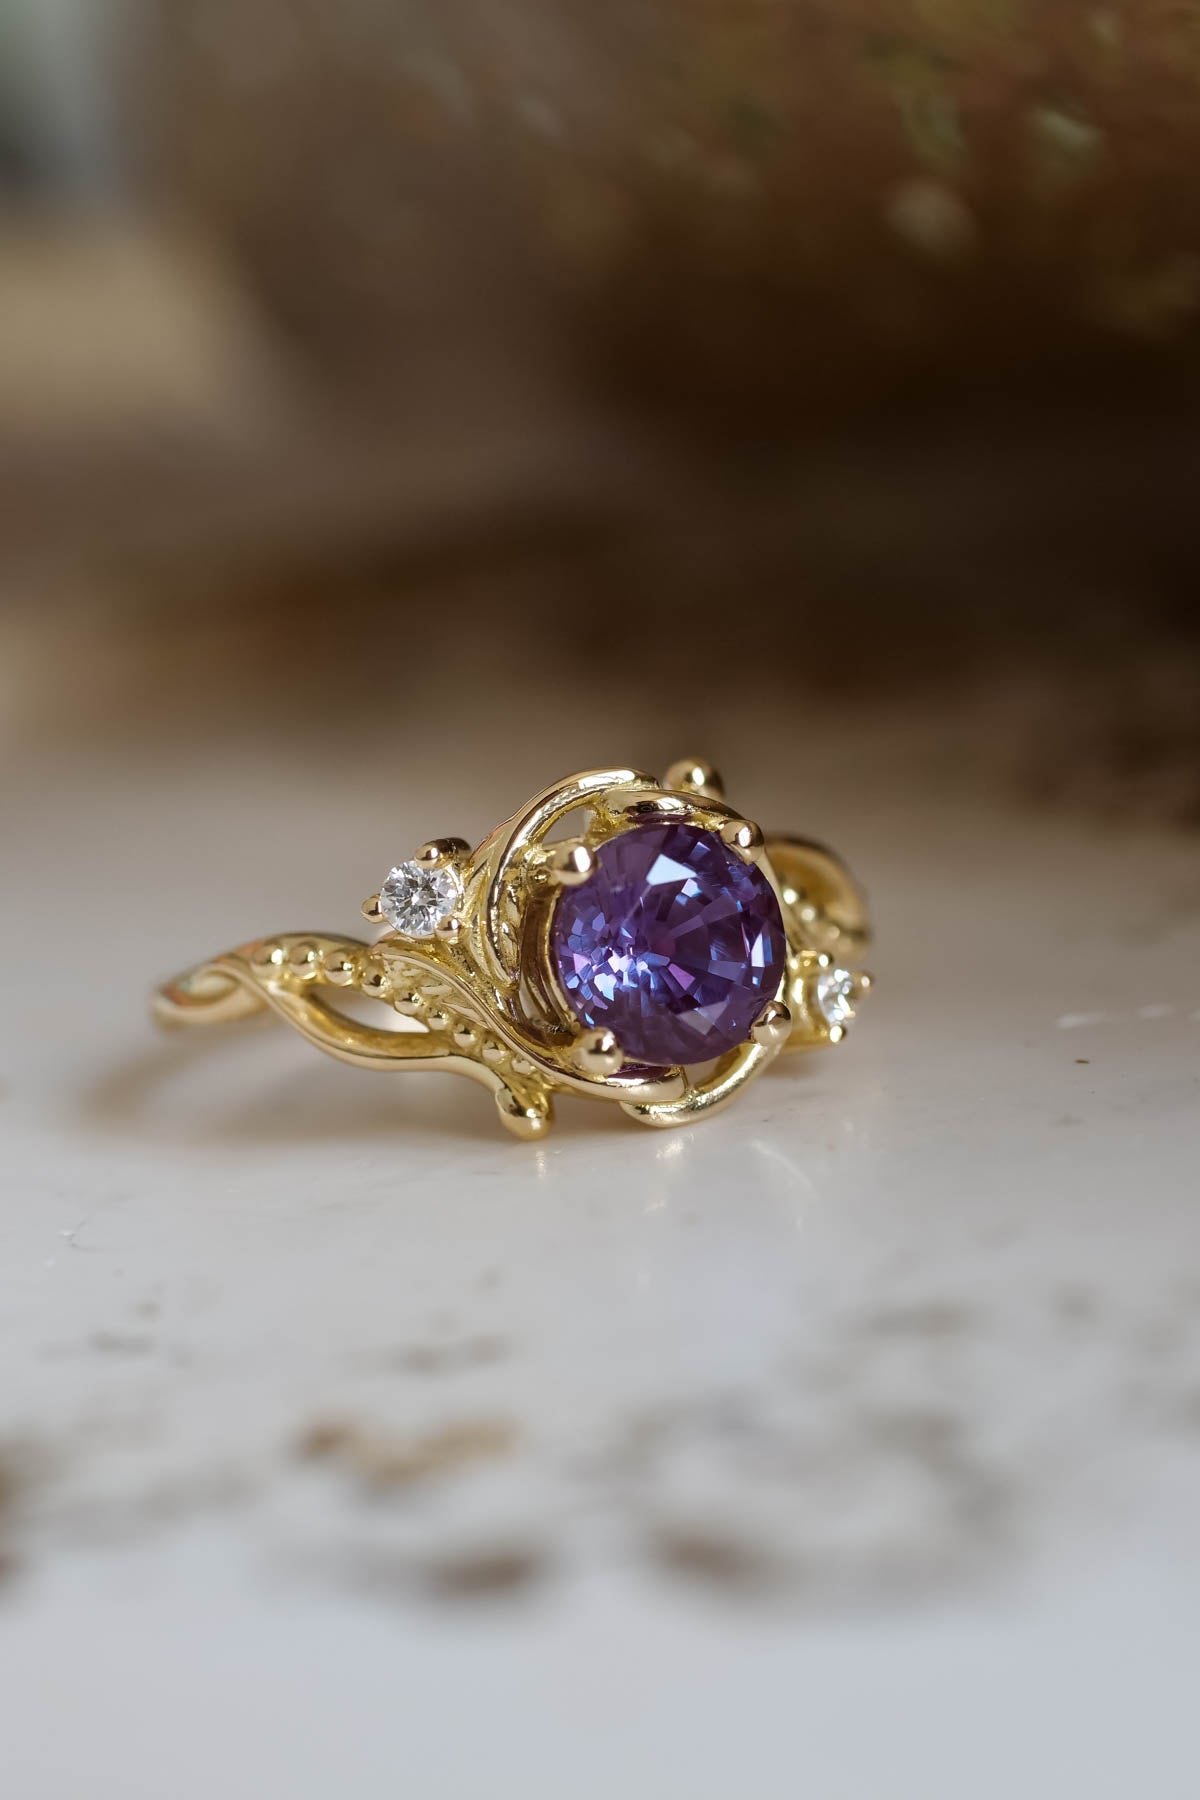 Big Alexandrite Changing Color Stone Ring Blue Purple